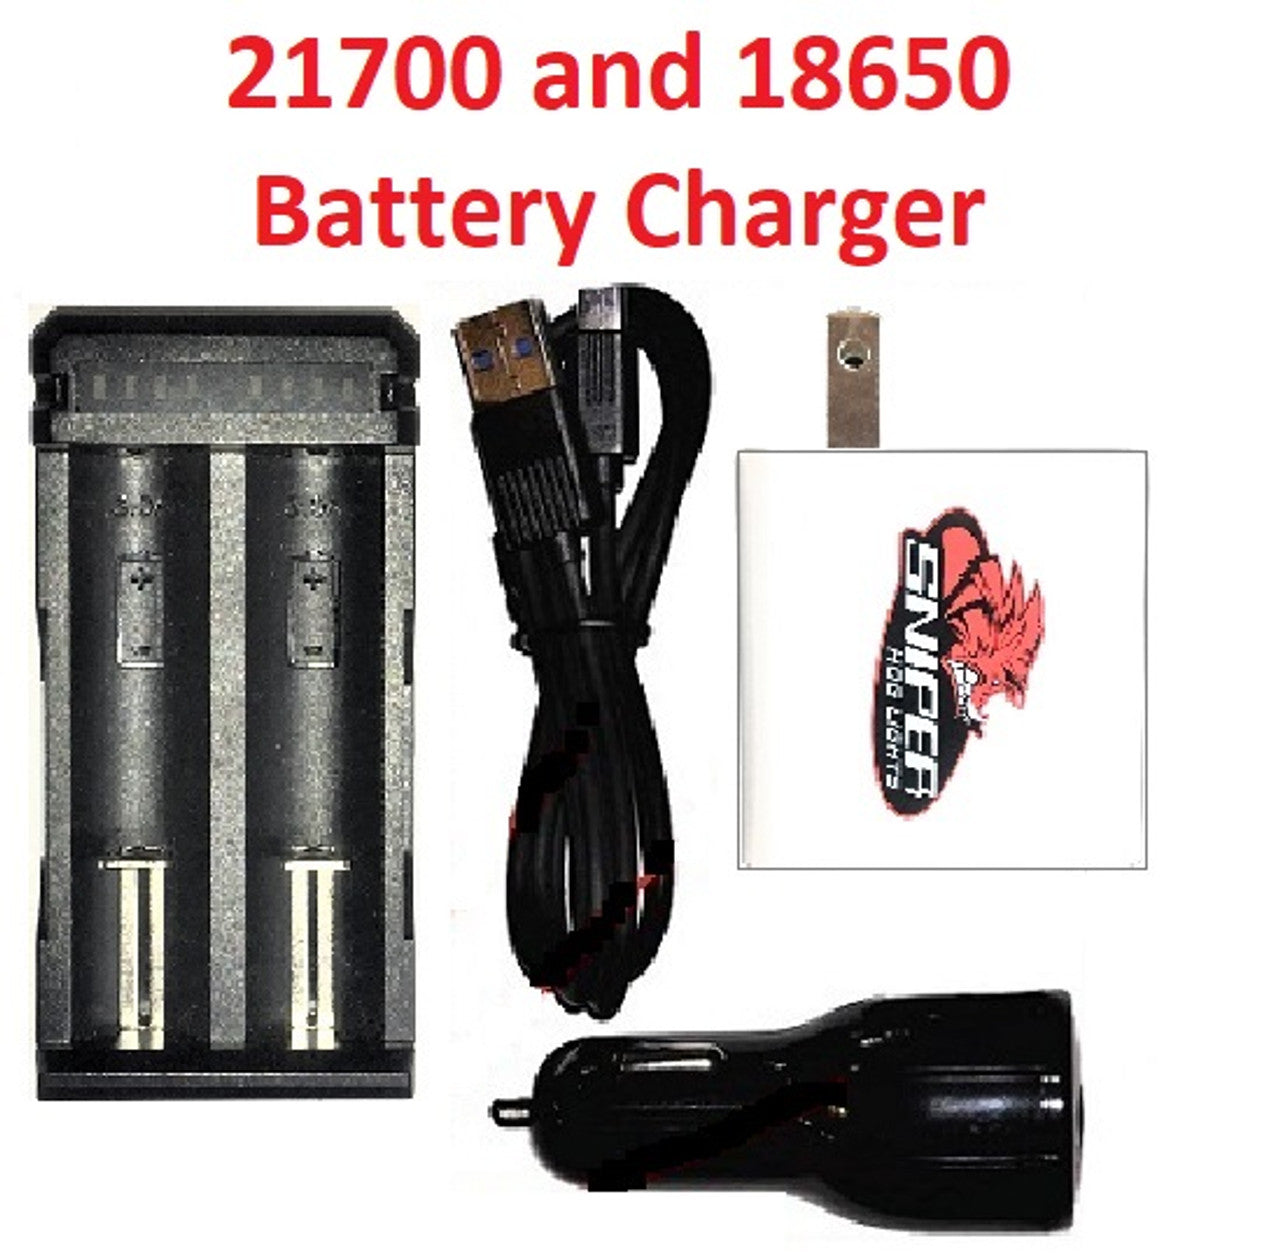 dawupine Used and Reconditioned Li-ion Battery Charger For Black